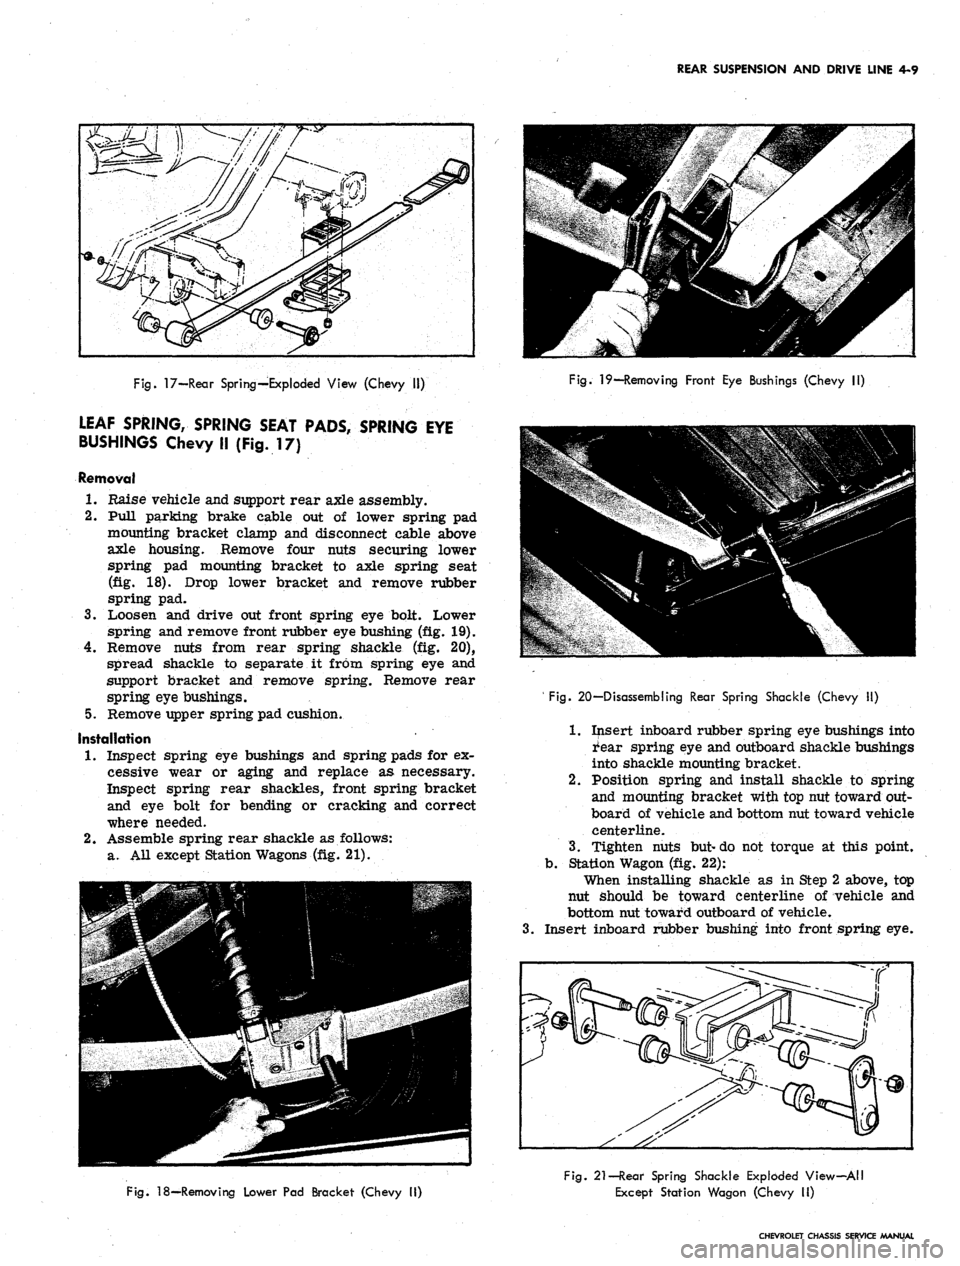 CHEVROLET CAMARO 1967 1.G Chassis Workshop Manual 
REAR SUSPENSION AND DRIVE LINE 4-9

Fig.
 17—Rear Spring—Exploded View (Chevy II)

LEAF SPRING, SPRING SEAT PADS, SPRING EYE

BUSHINGS Chevy II (Fig. 17)

Removal

1.
 Raise vehicle and support r